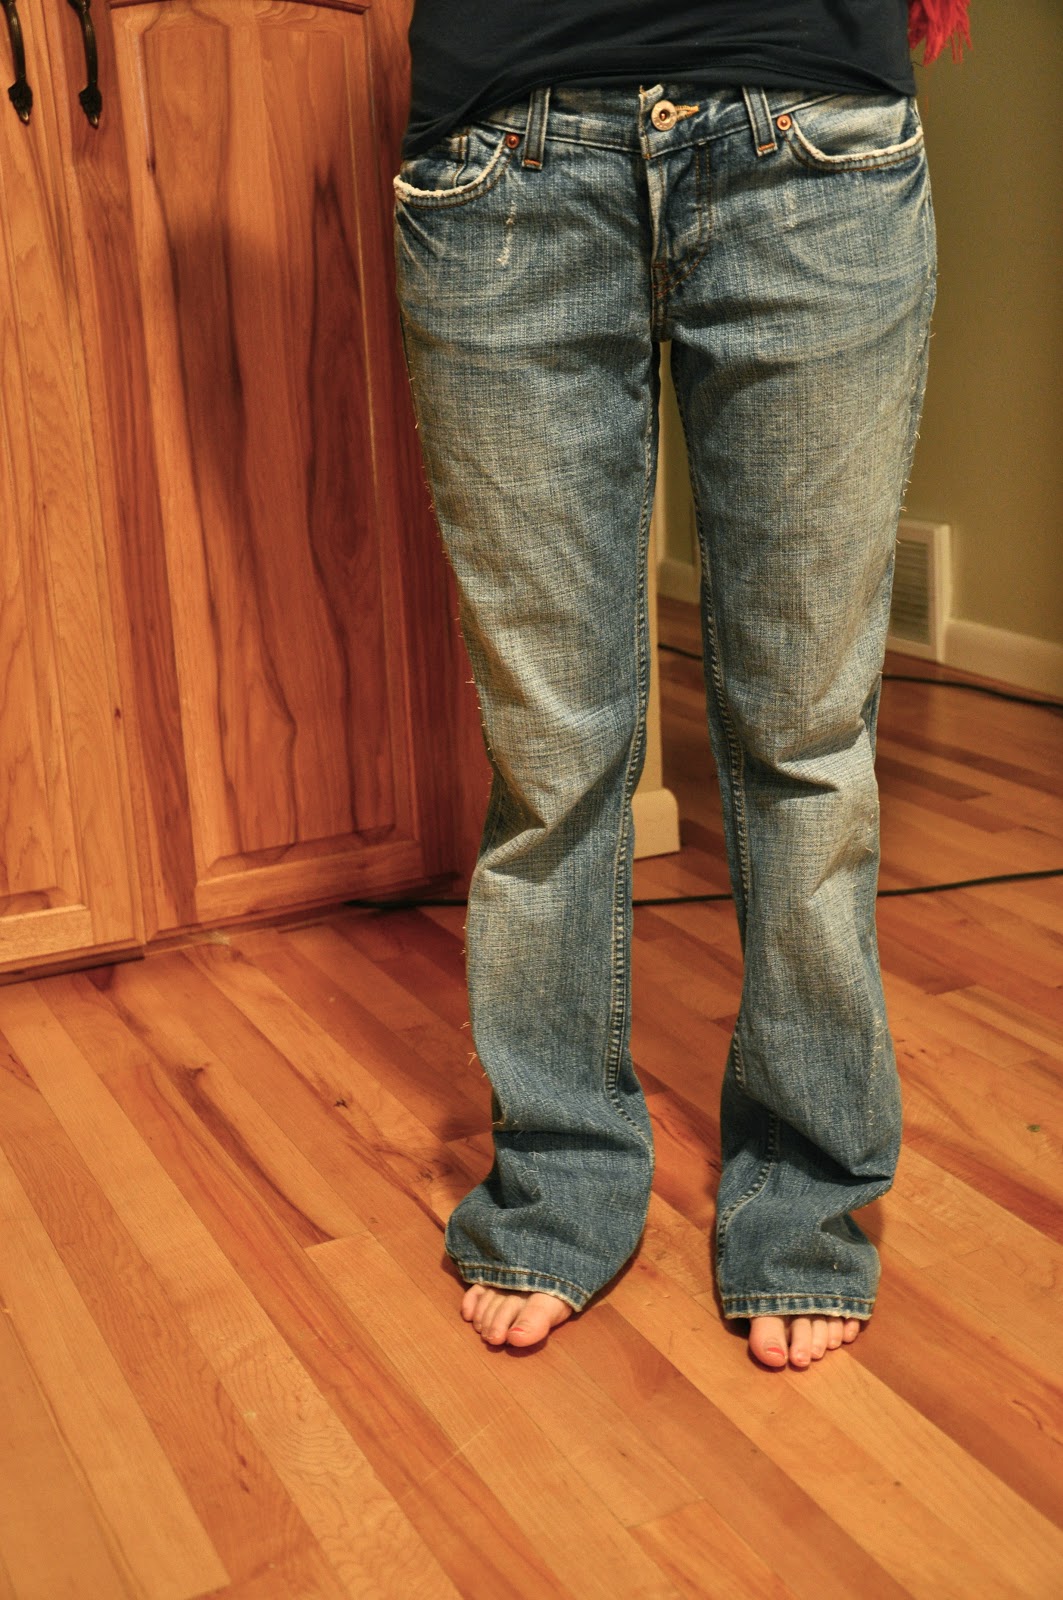 C&C: How to make jeans smaller or just skinnies!